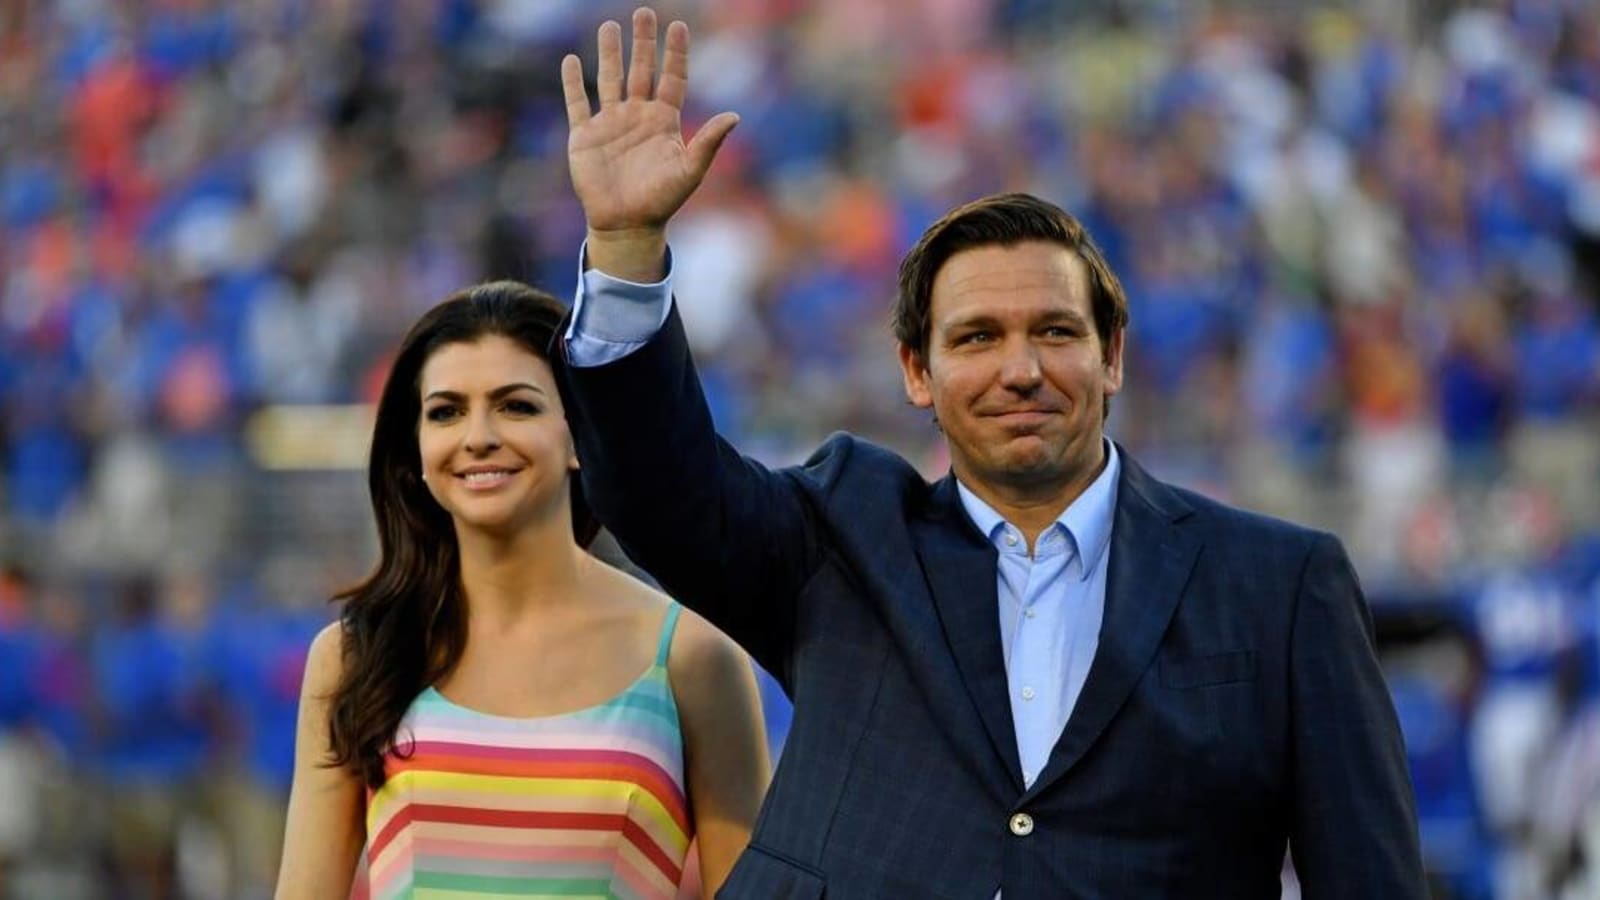 Florida Governor Ron DeSantis was Once a Star Baseball Player at Yale